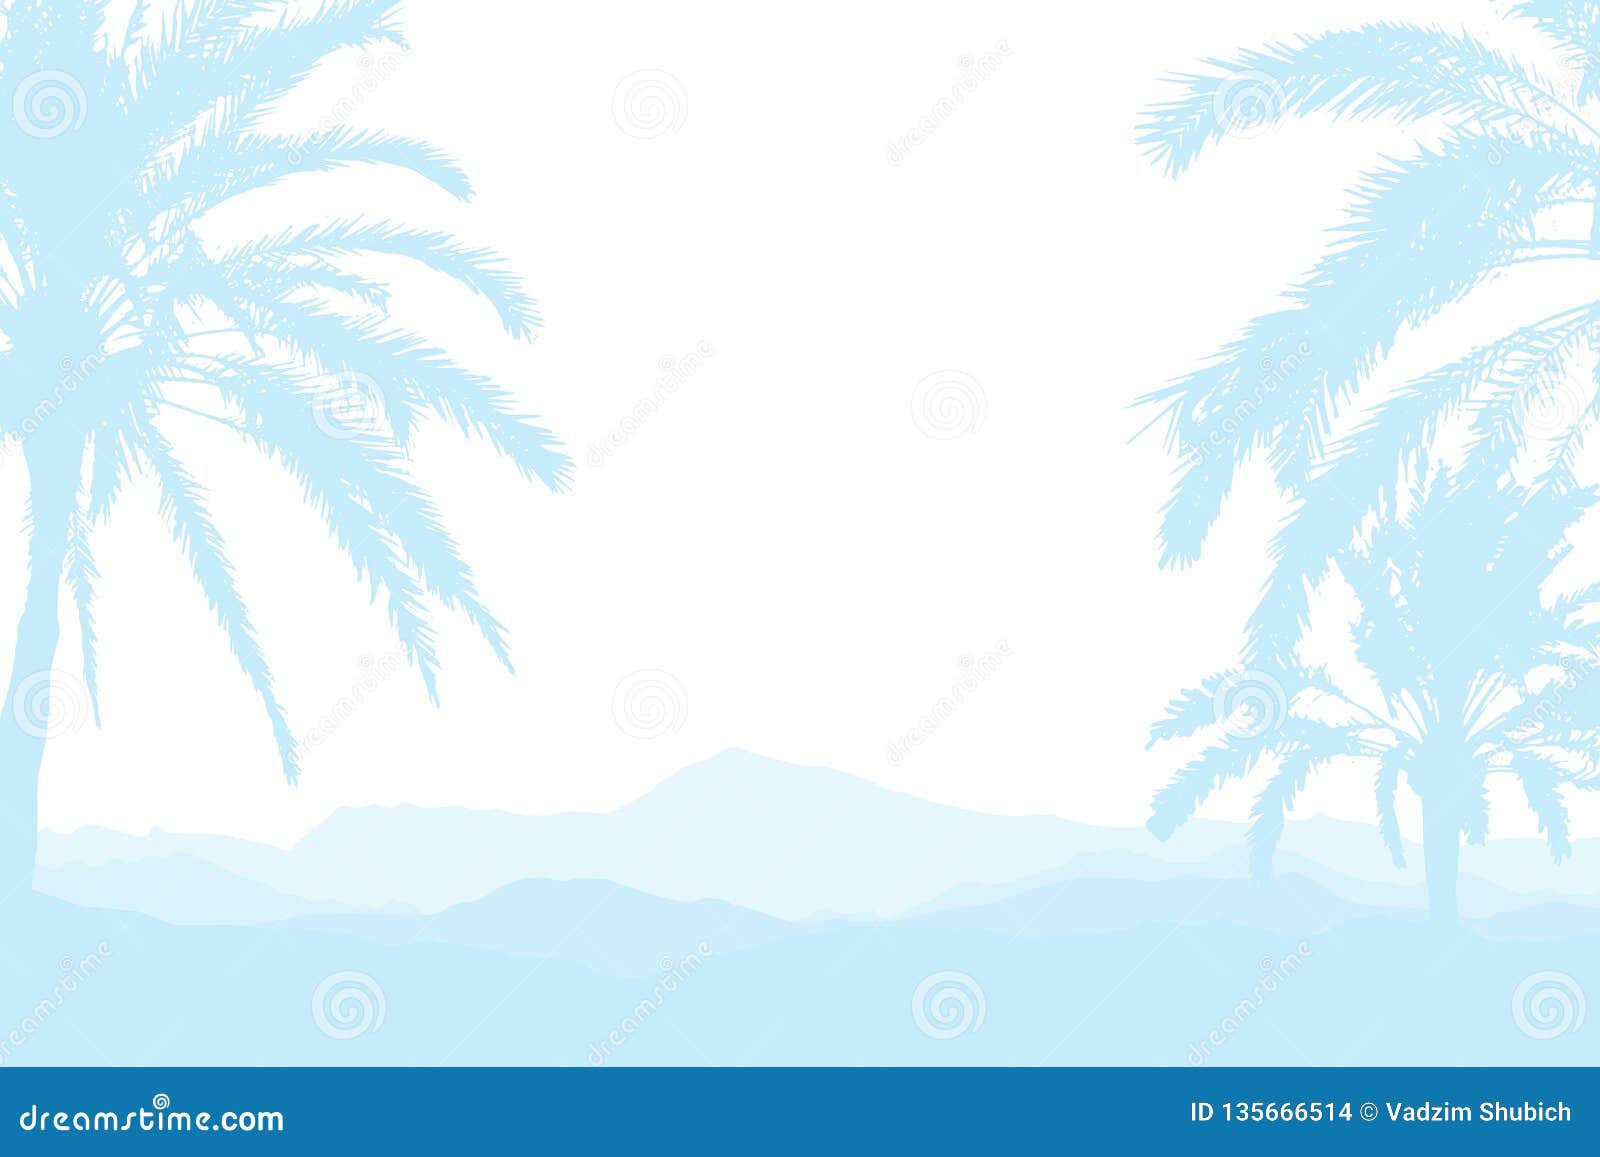 Time To Travel. Banner with Silhouettes of Tropical Palm Trees on a White  Background for Tourism. Stock Vector - Illustration of california,  environment: 135666514